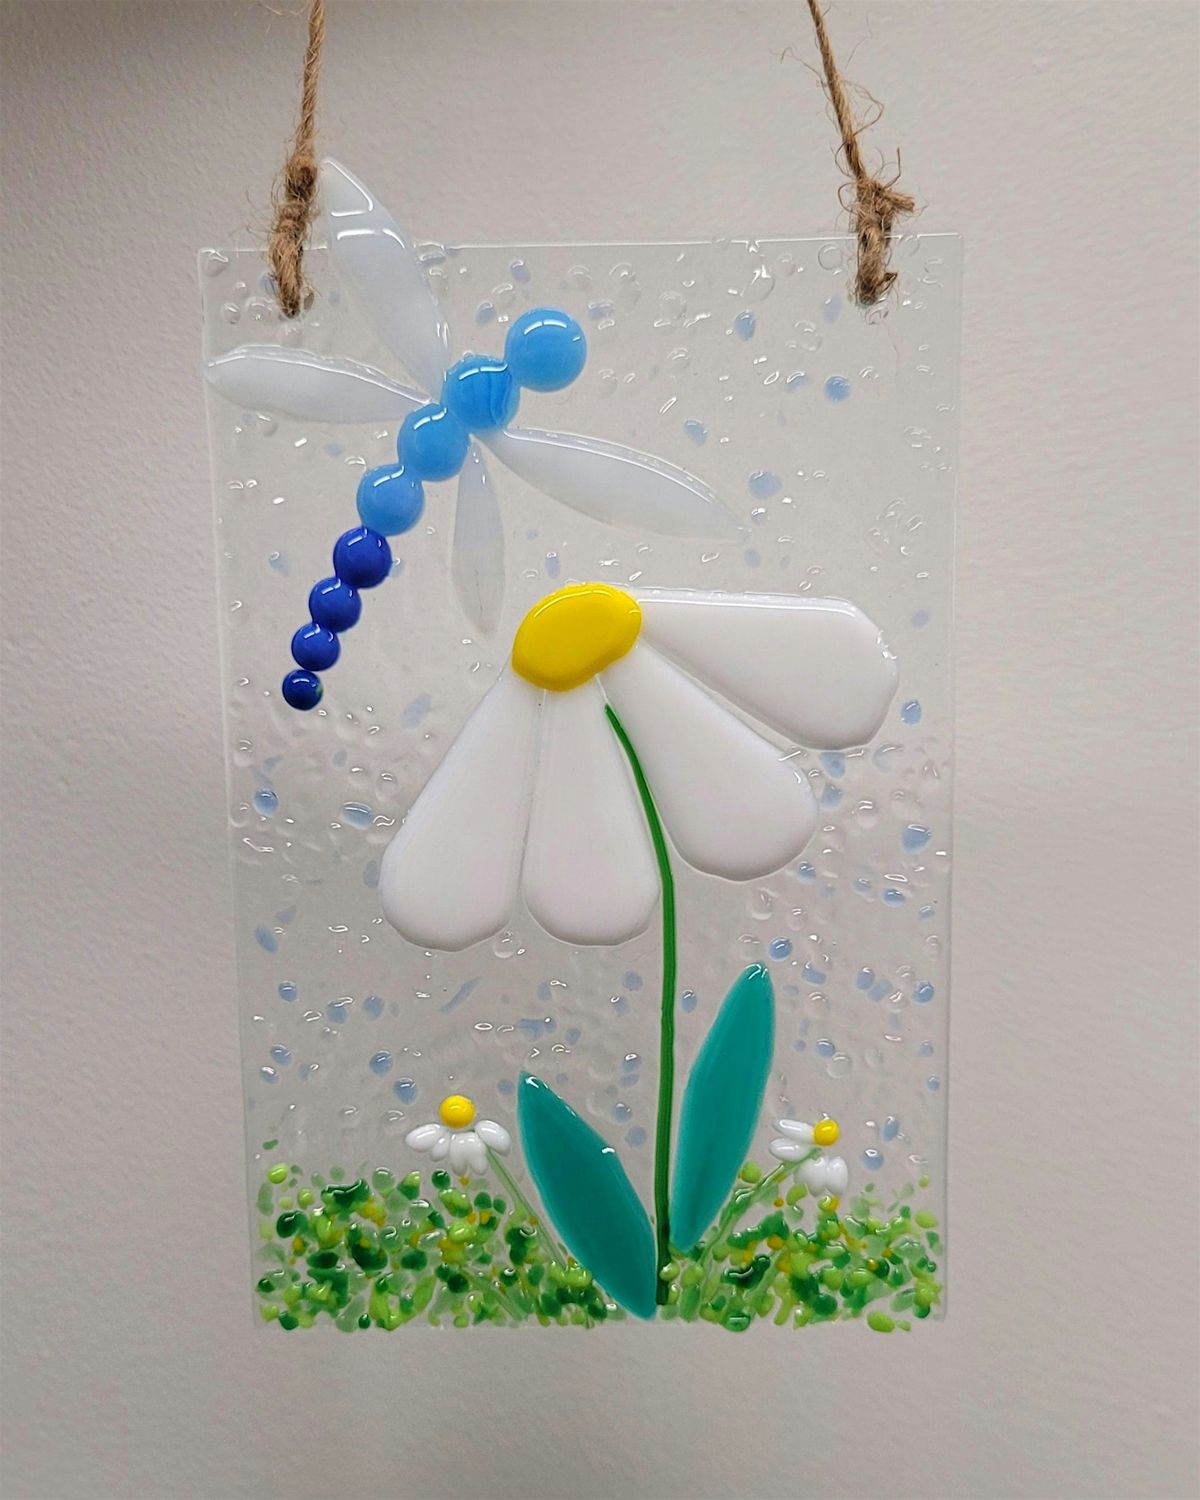 Fused Glass Workshop by Carly Beckstead